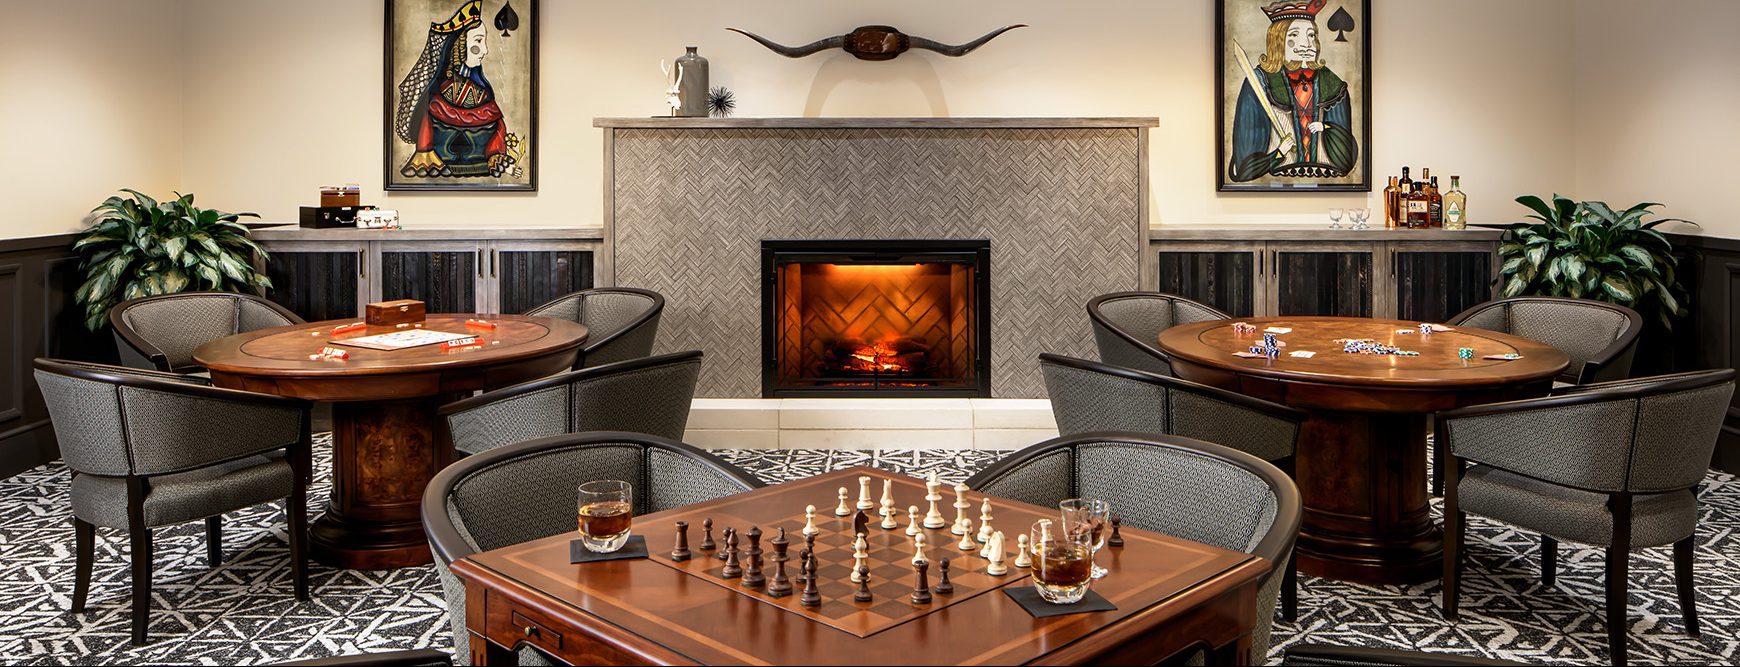 cozy and relaxing board game room at maravilla